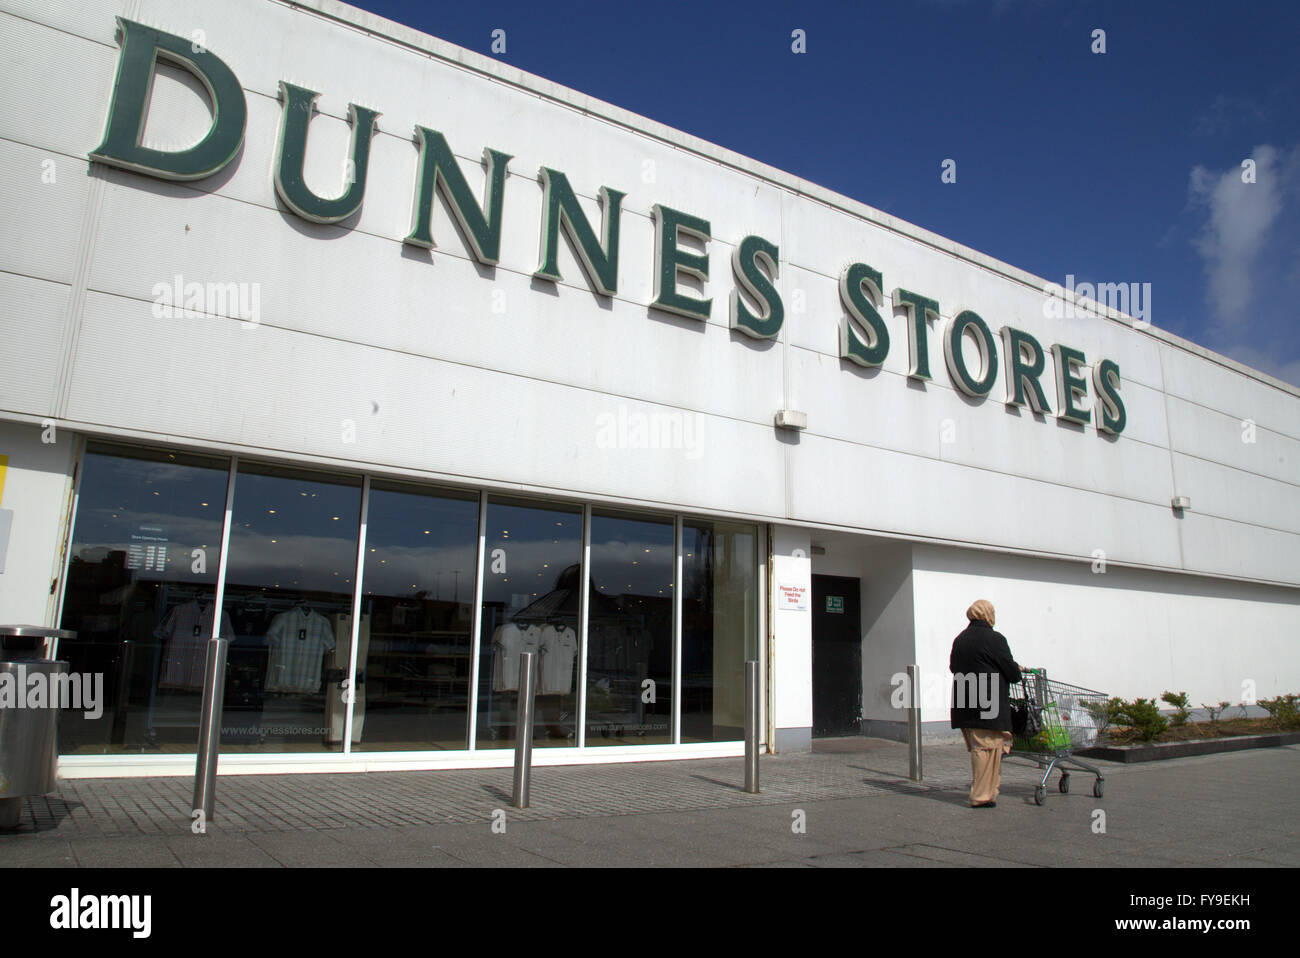 Clygebank Dunnes Stores Shopping Centre Banque D'Images